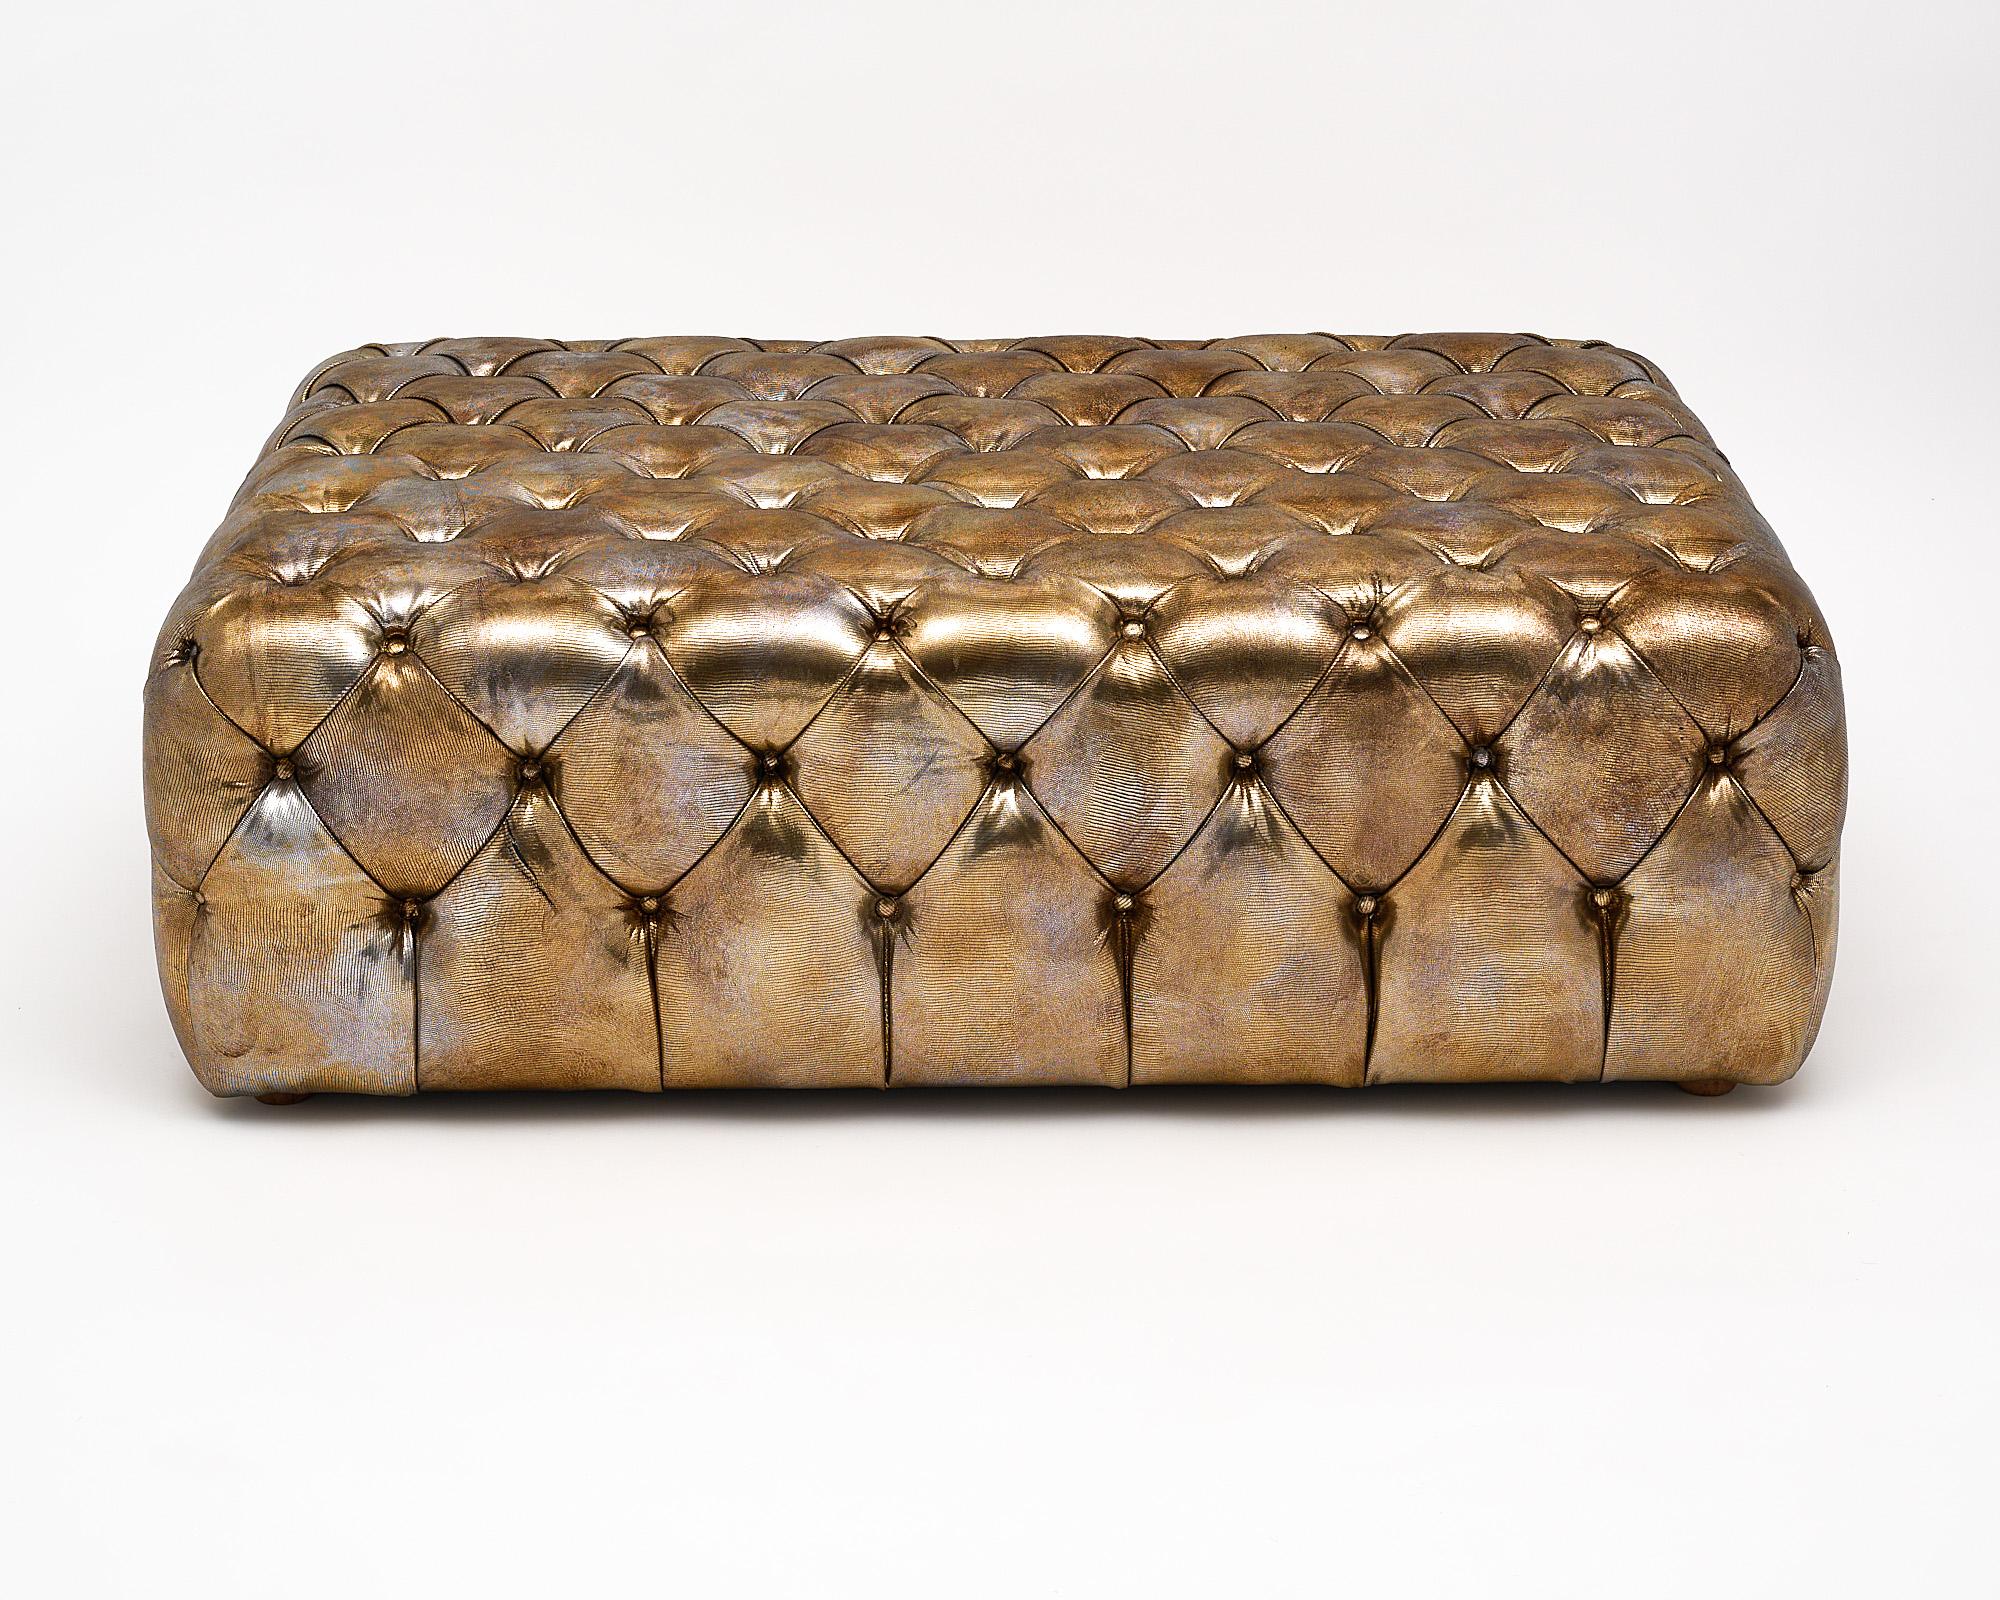 Late 20th Century Italian Gold Leather Chesterfield Ottoman/Bench